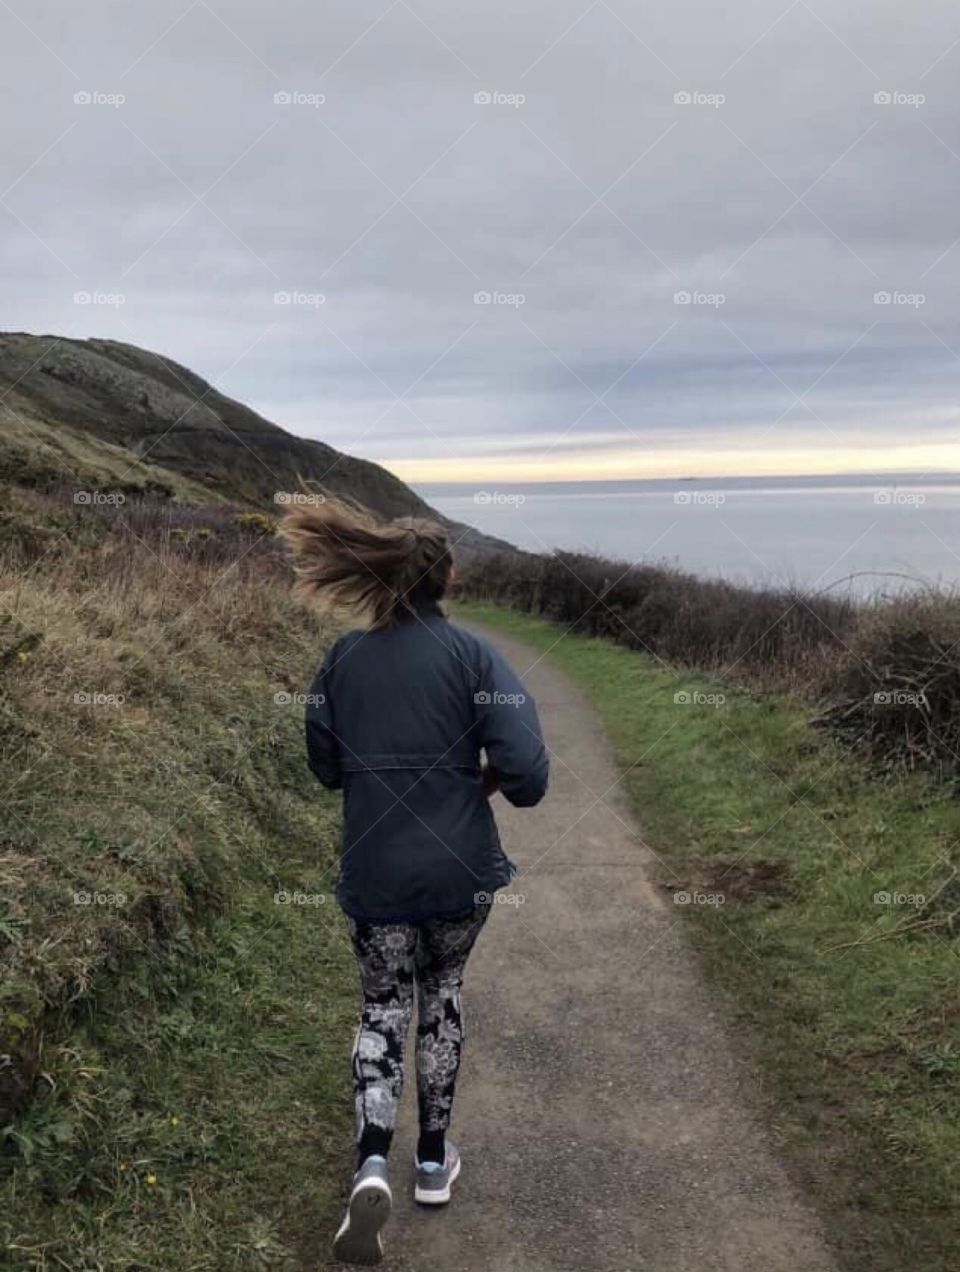 My run down the Gower